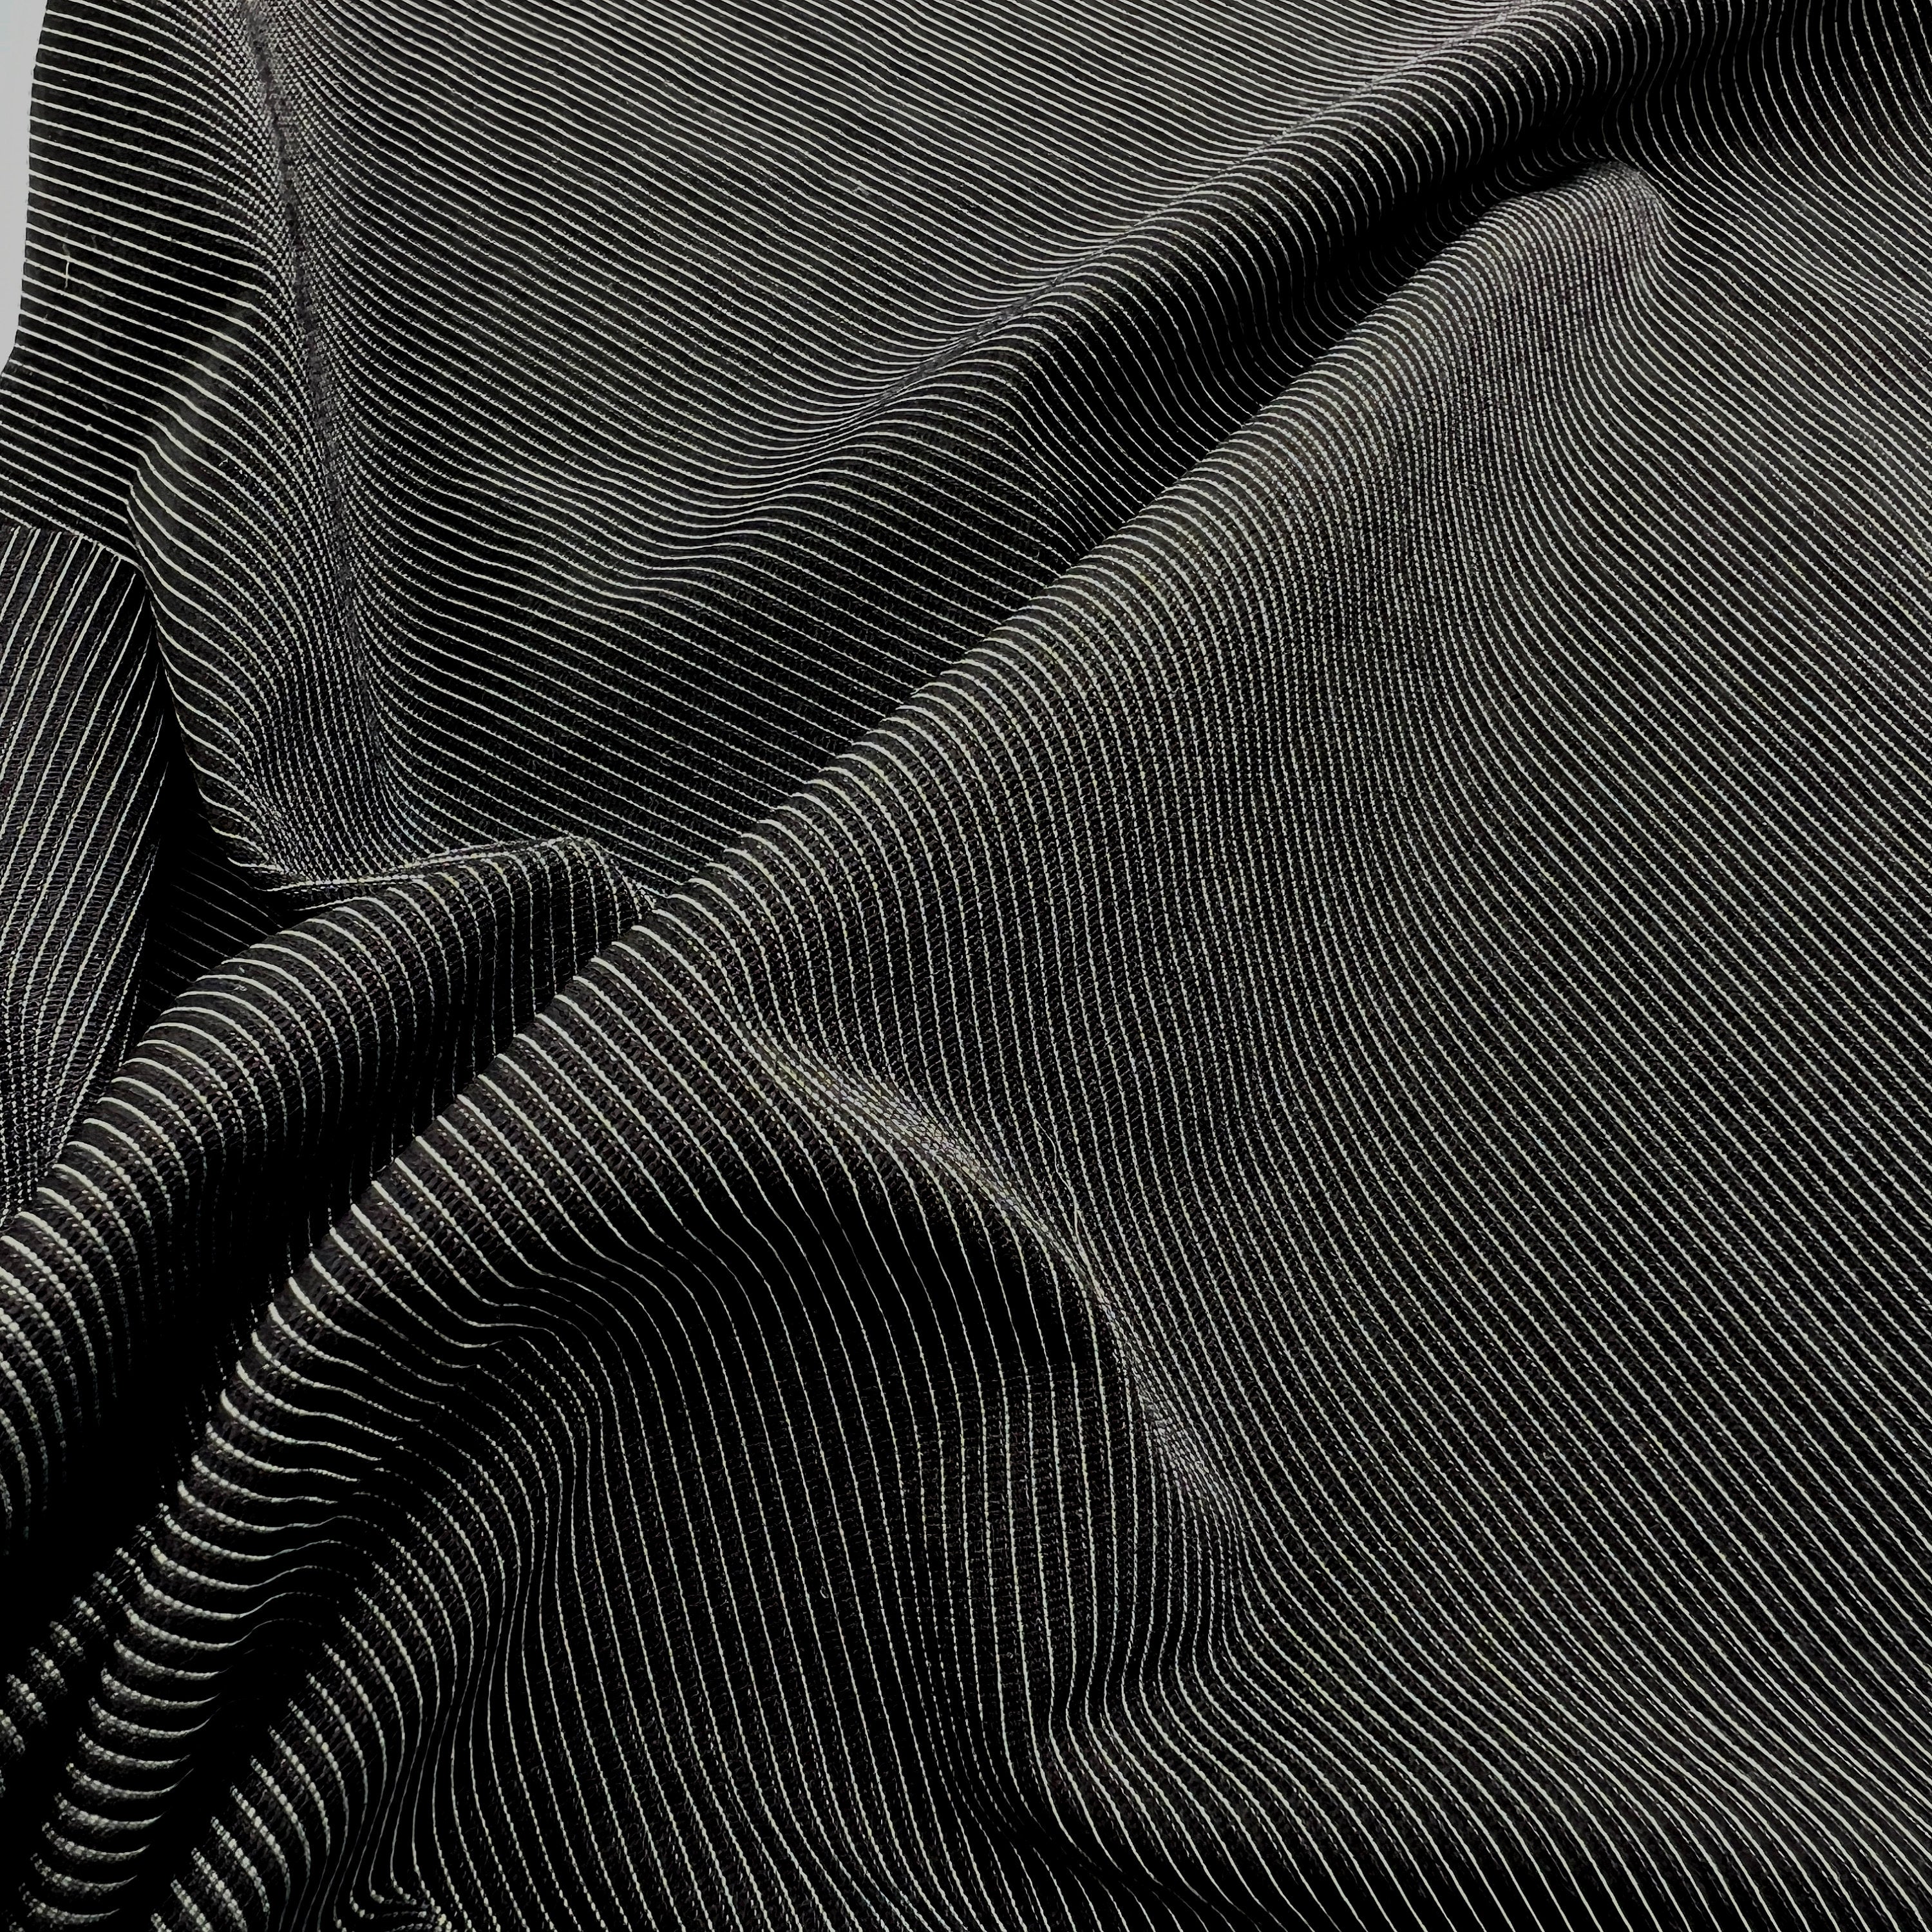 CLEARANCE- Stretch Tricot Fabric lightweight, Black with Pinstripes- 1 yd piece